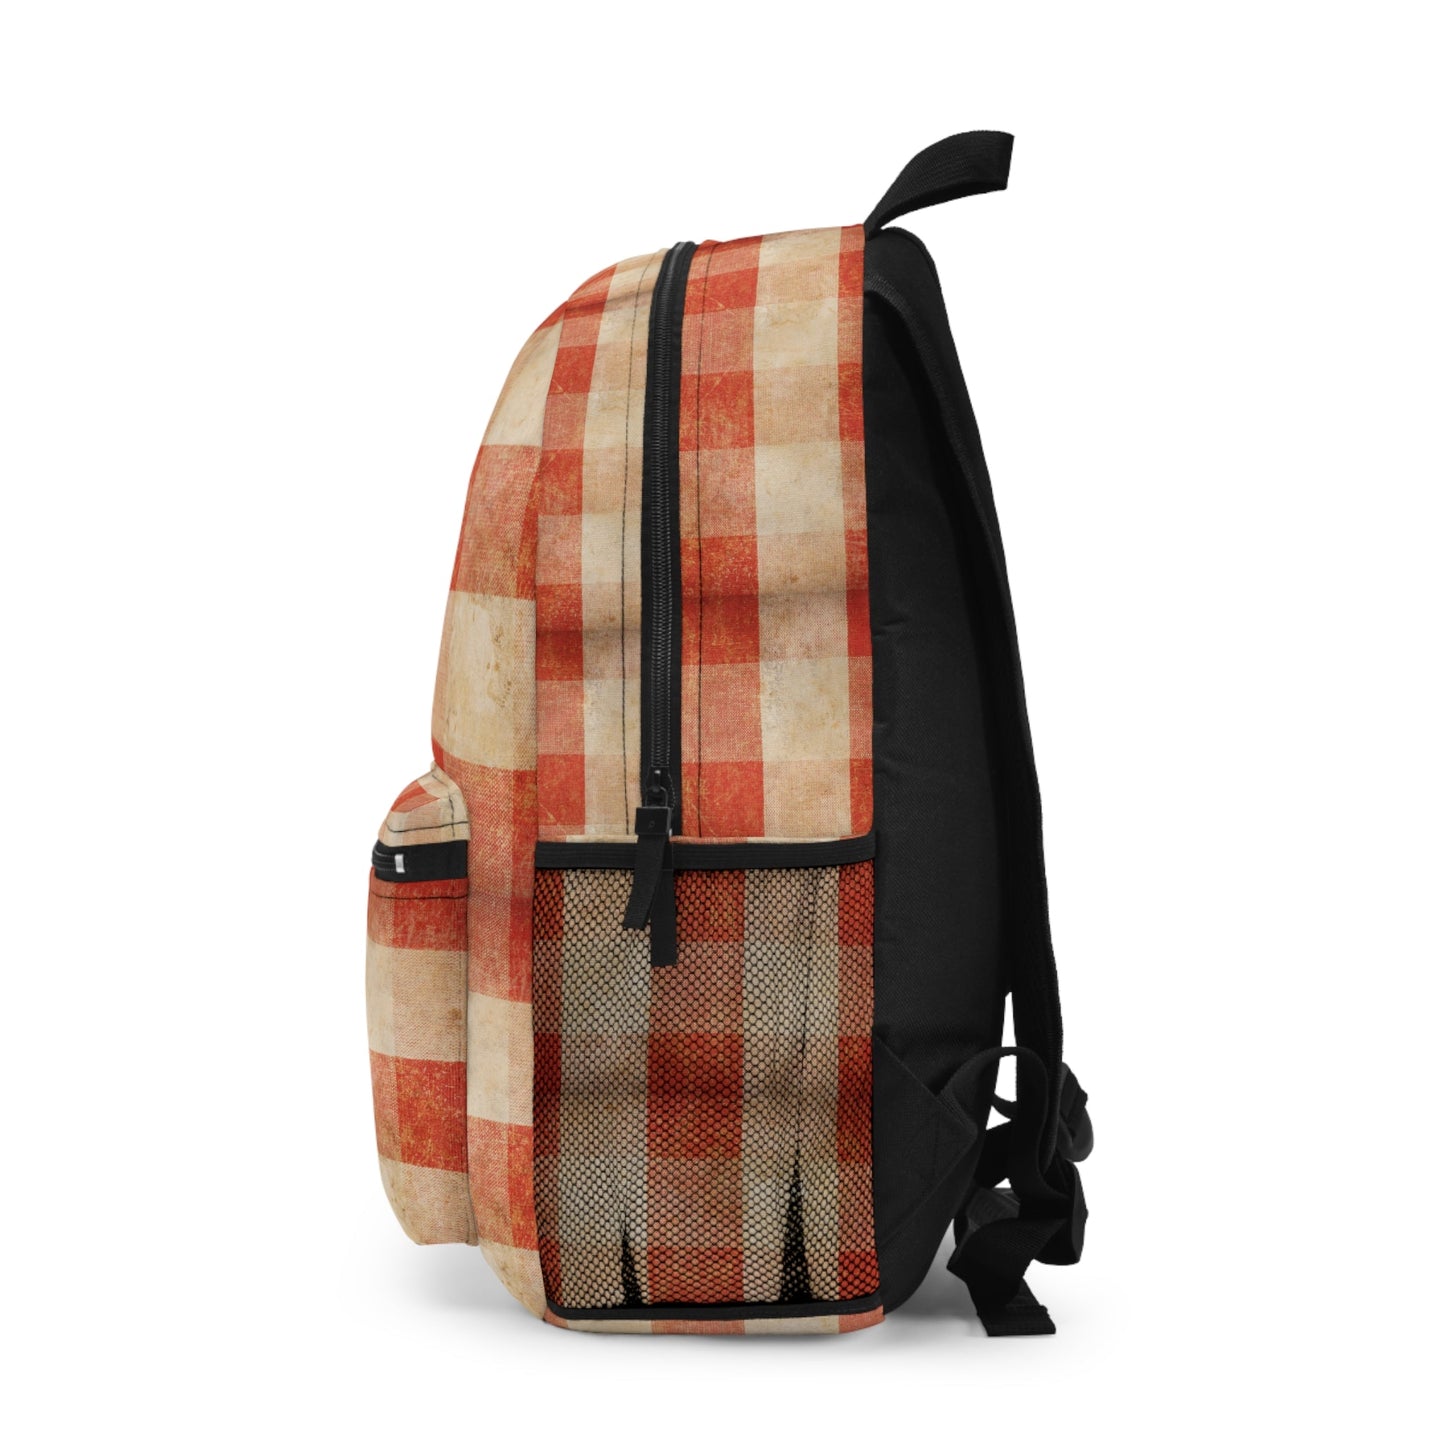 Bags - Retro Red Checkers Backpack